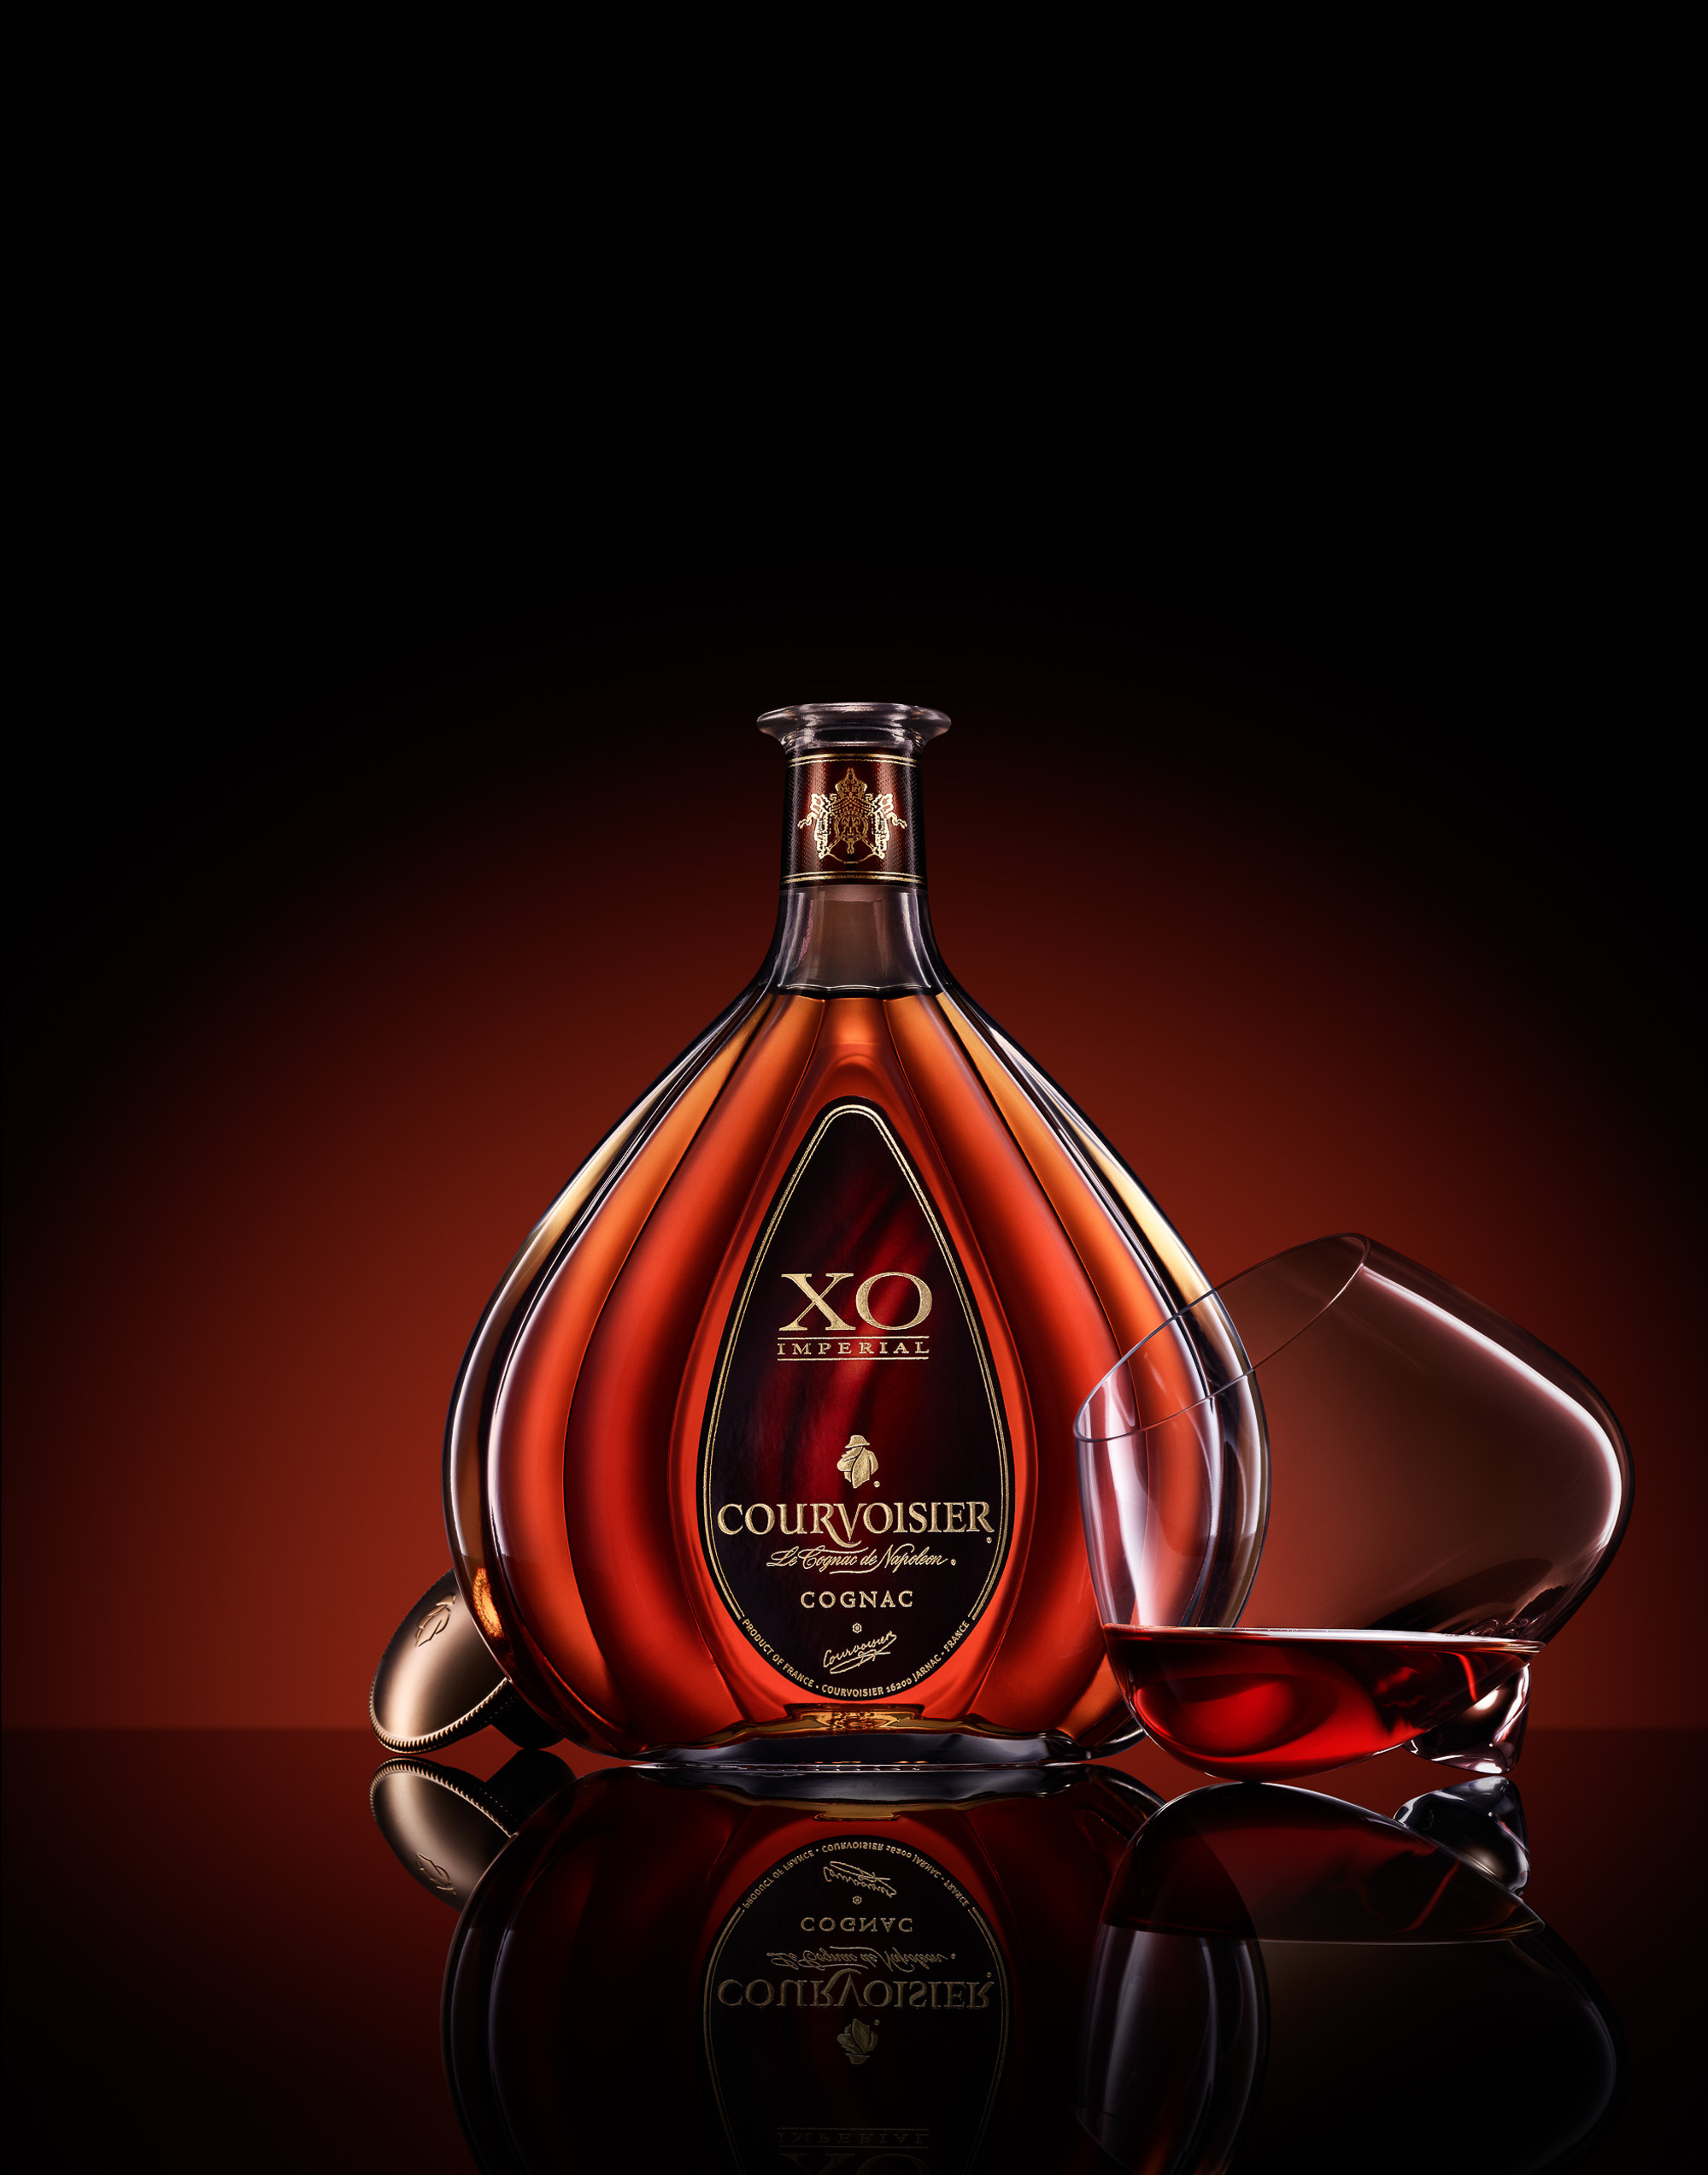 Courvoisier XO bottle photography. Beverage and liquid product & advertising photography by Timothy Hogan Studio in Los Angeles